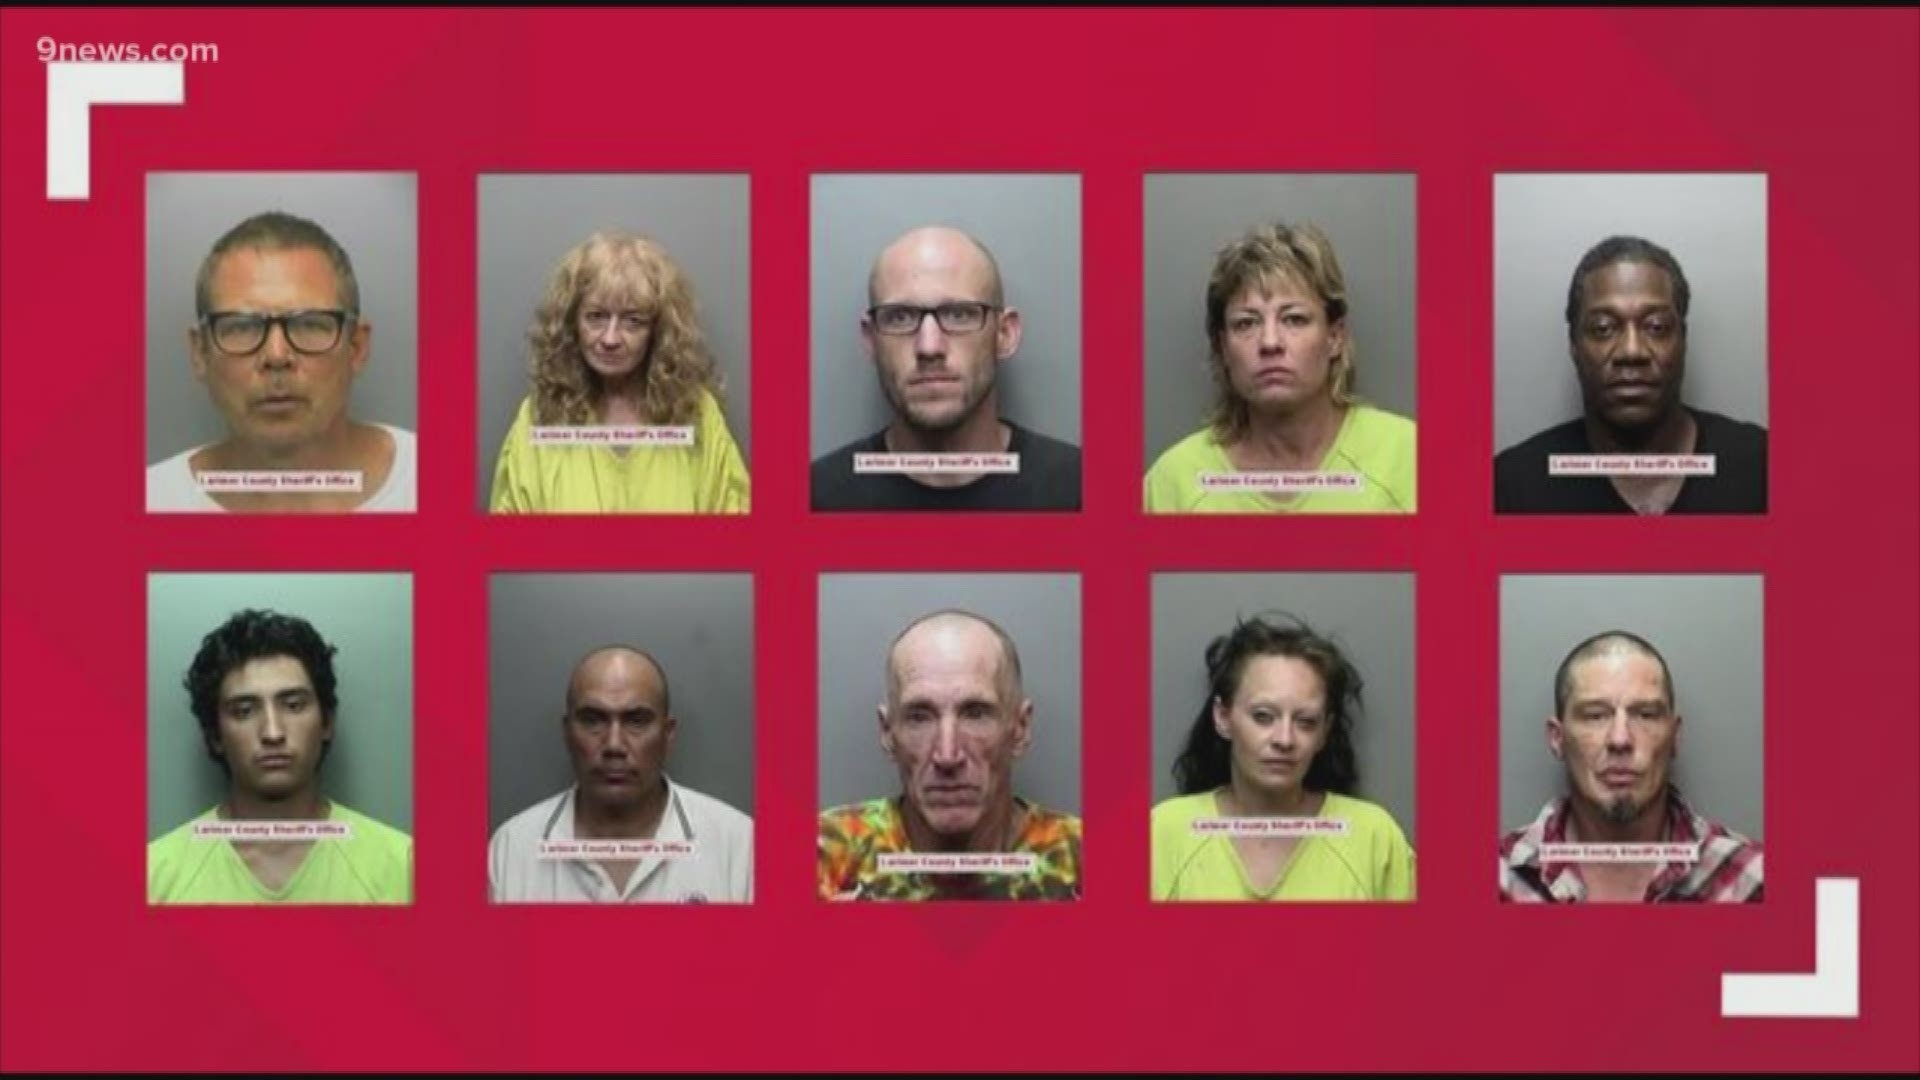 The suspects were arrested as part of an 8-month investigation known as Operation Malverde. They're facing a total of more than 120 felony charges.